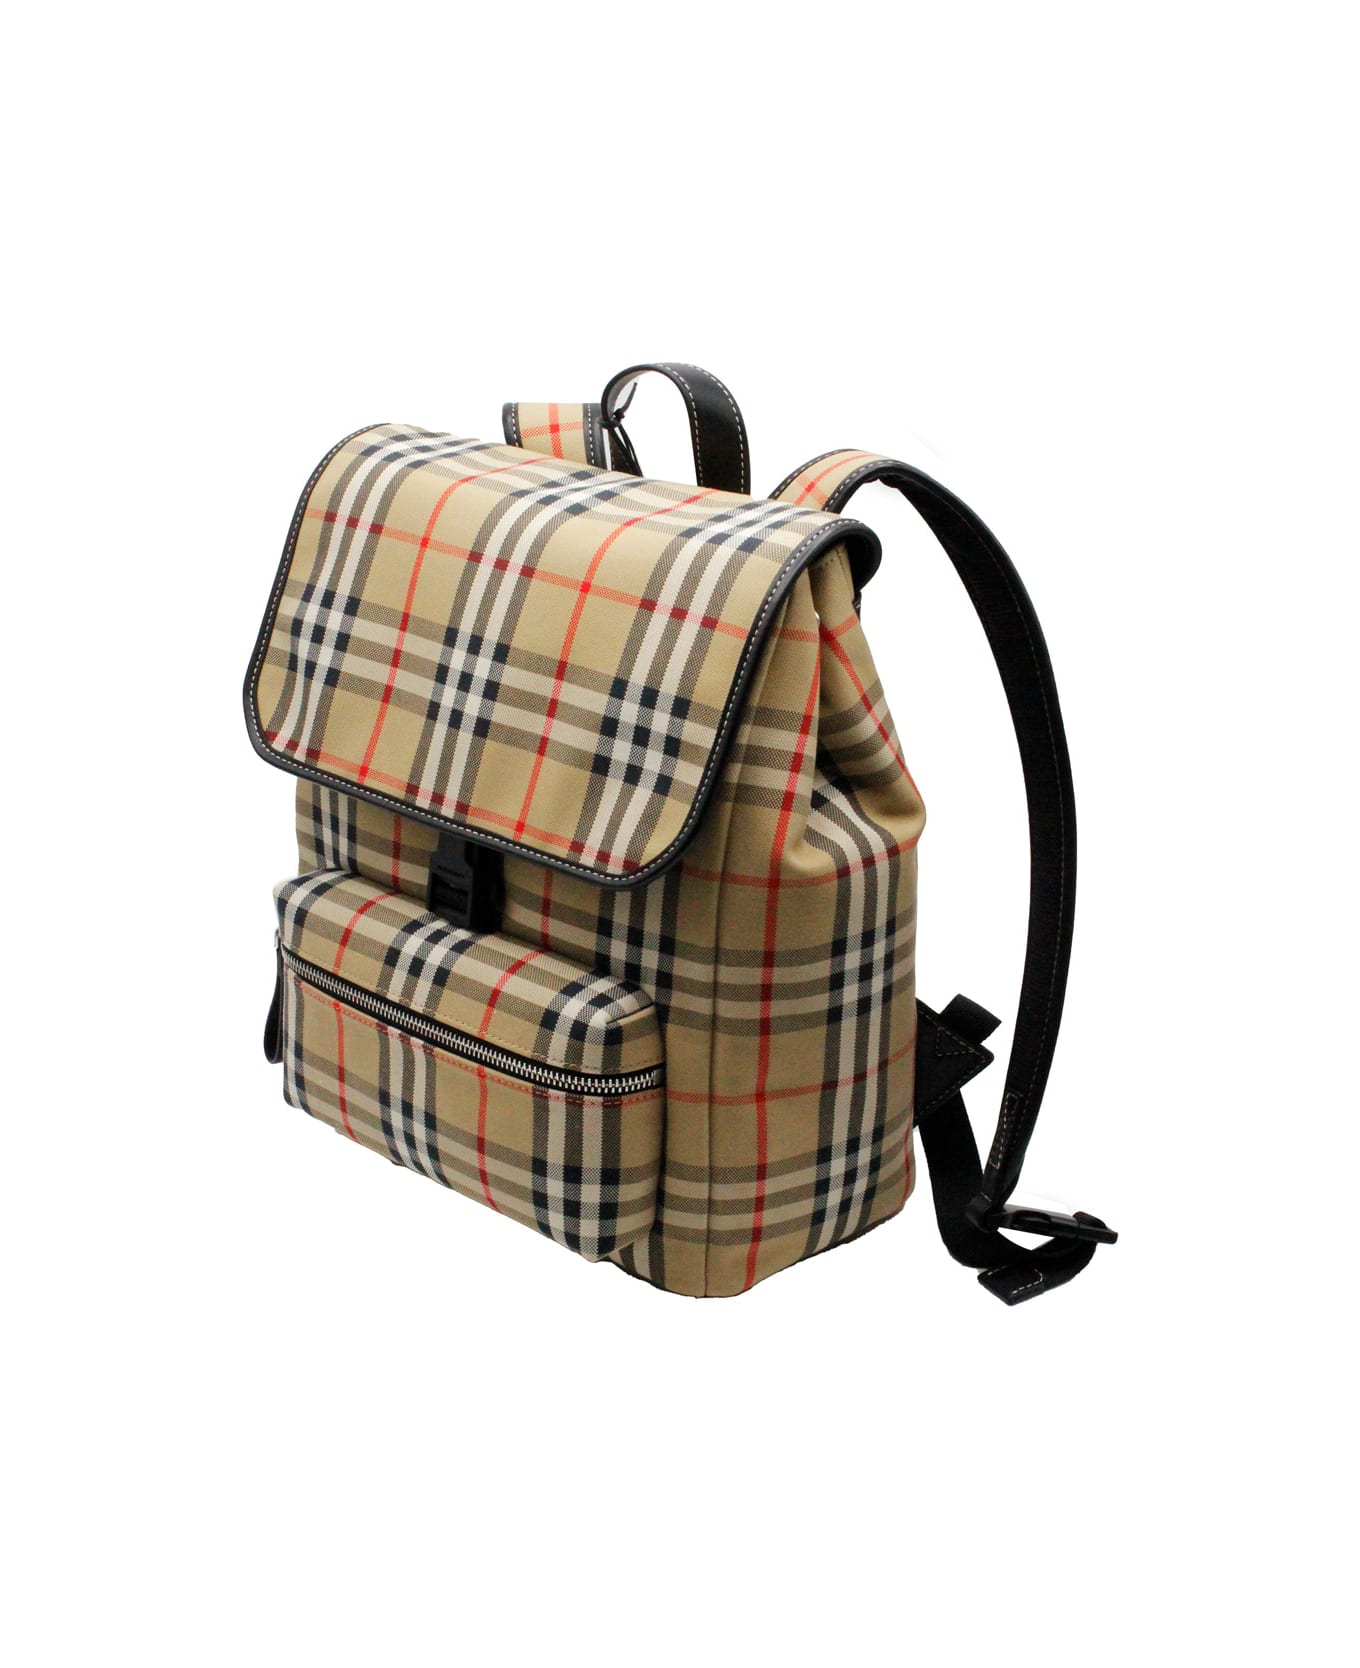 Burberry Backpack In Organic Cotton Fabric With Vintage Check Motif With Adjustable Shoulder Straps. - Beige アクセサリー＆ギフト